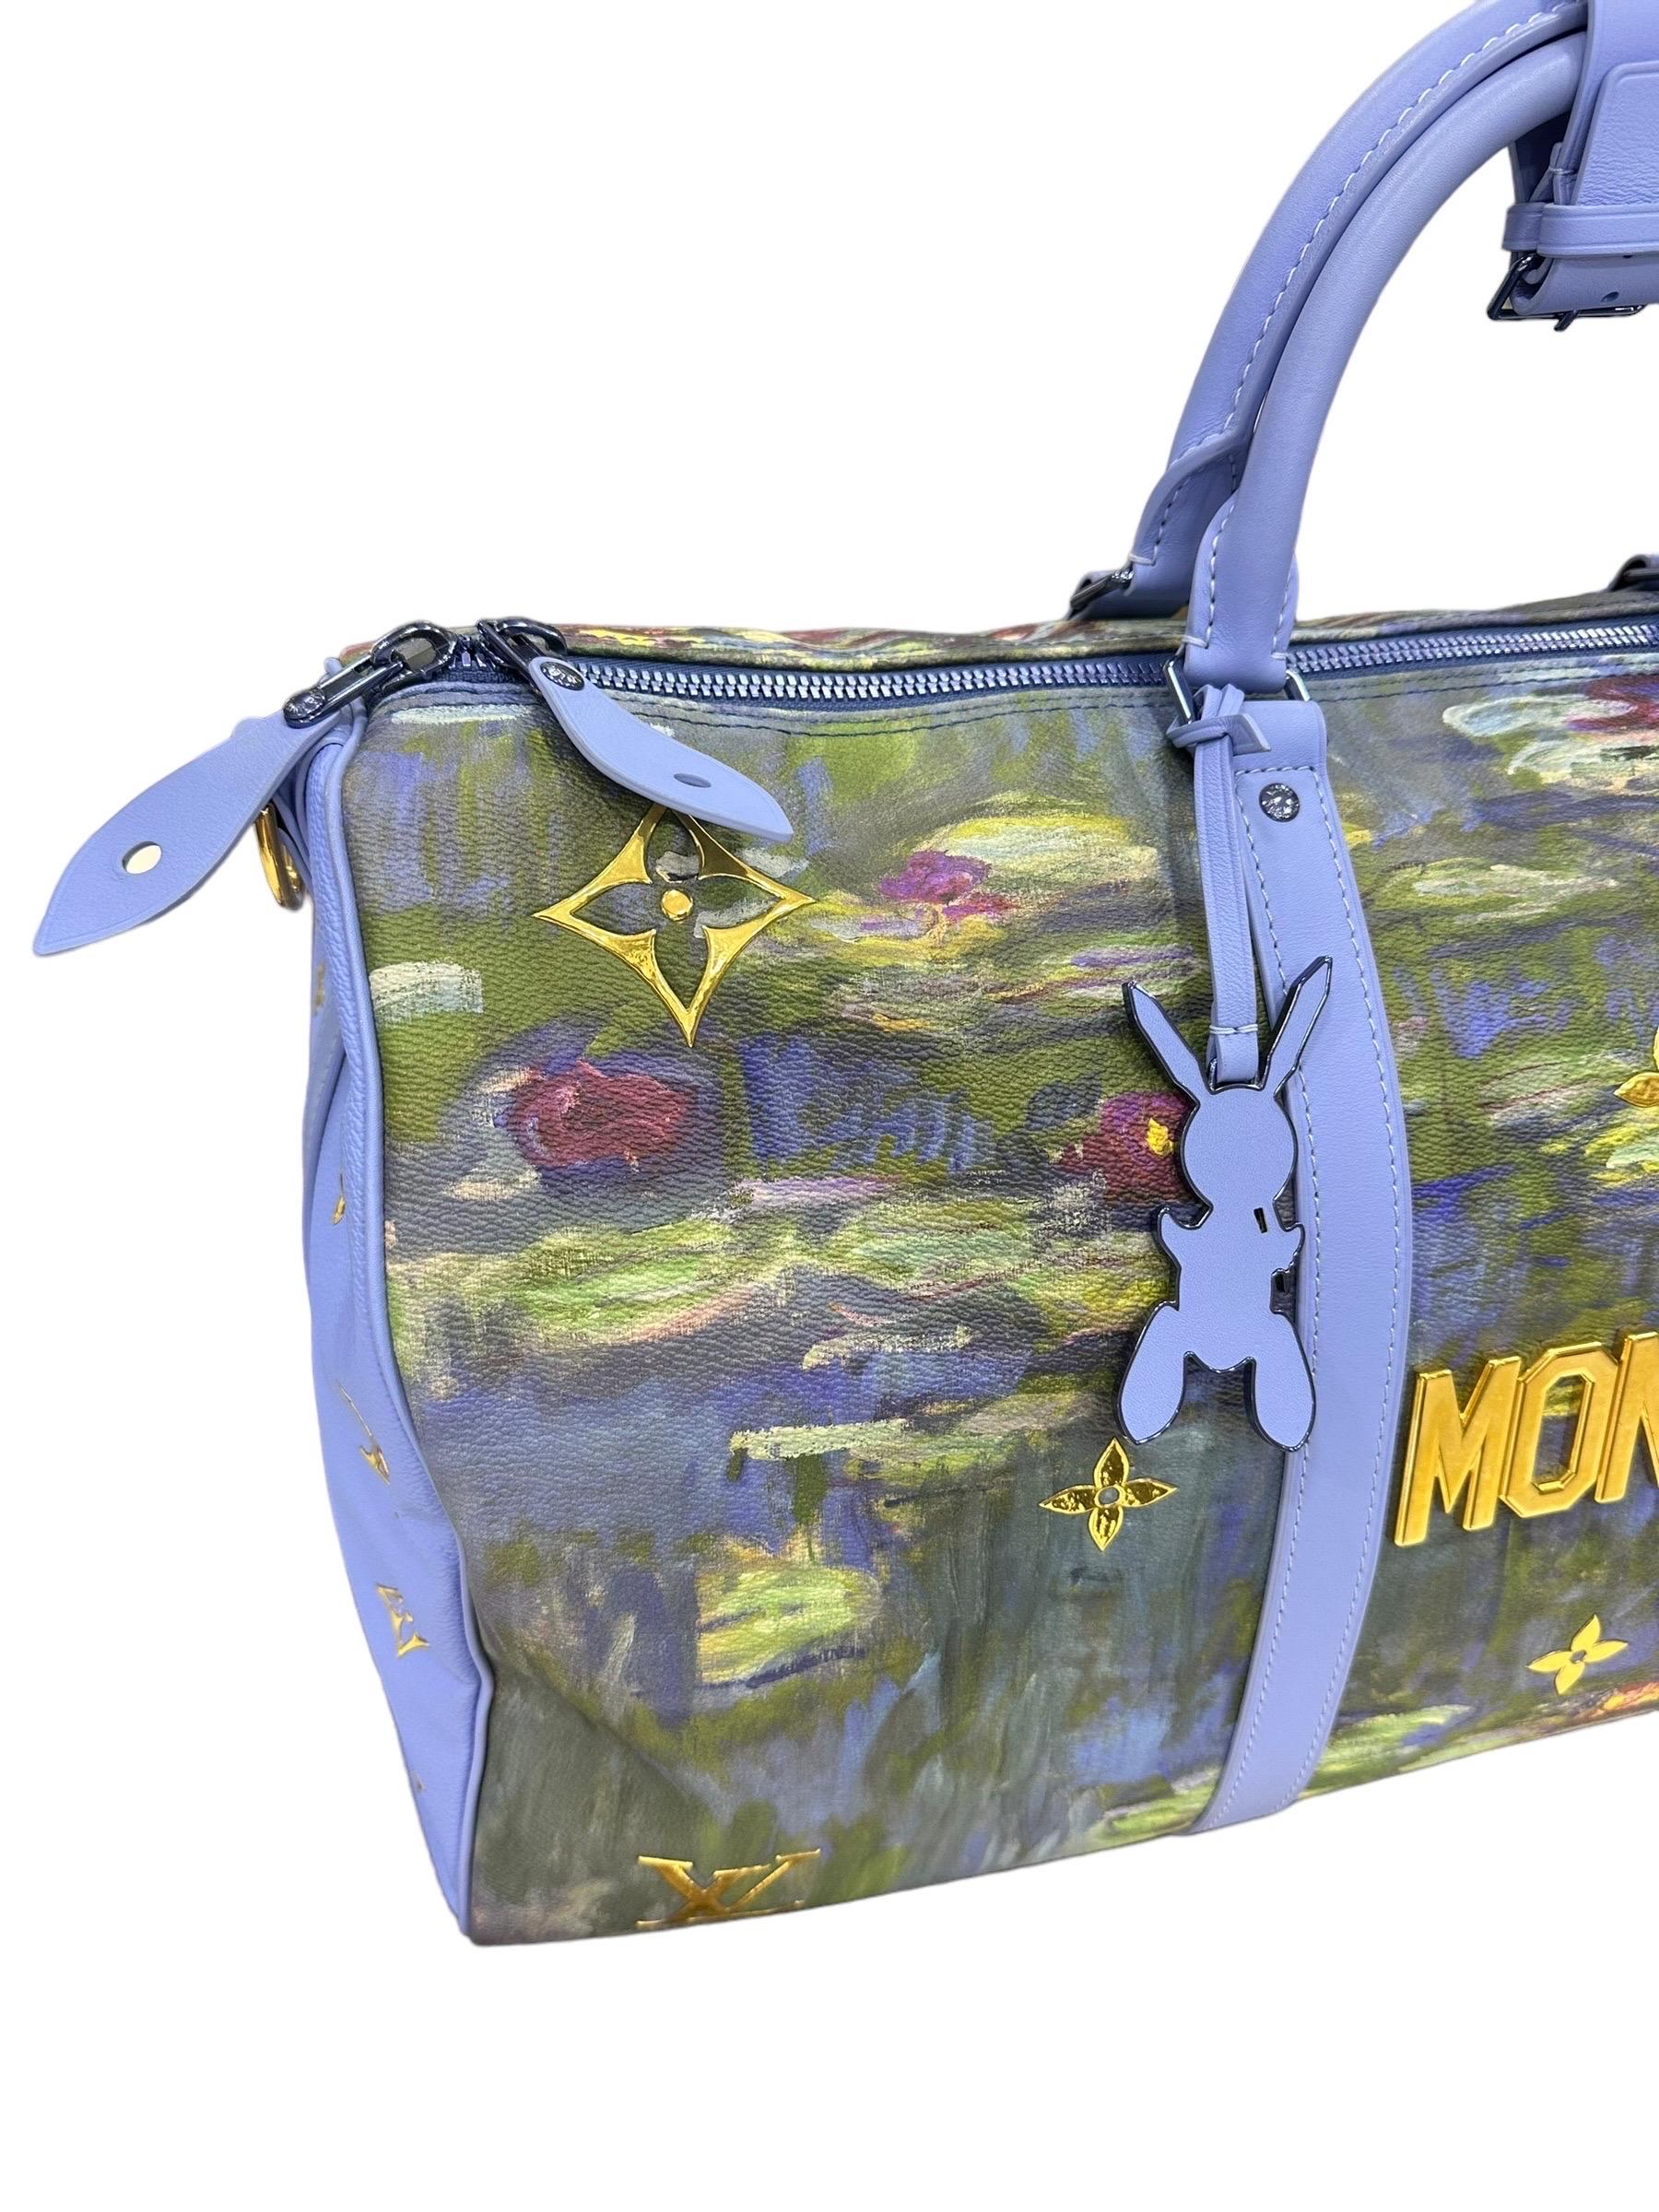 Borsa A Mano Louis Vuitton Keepall 50 Bandouliére Masterly Collection Monet L.E. im Zustand „Hervorragend“ im Angebot in Torre Del Greco, IT